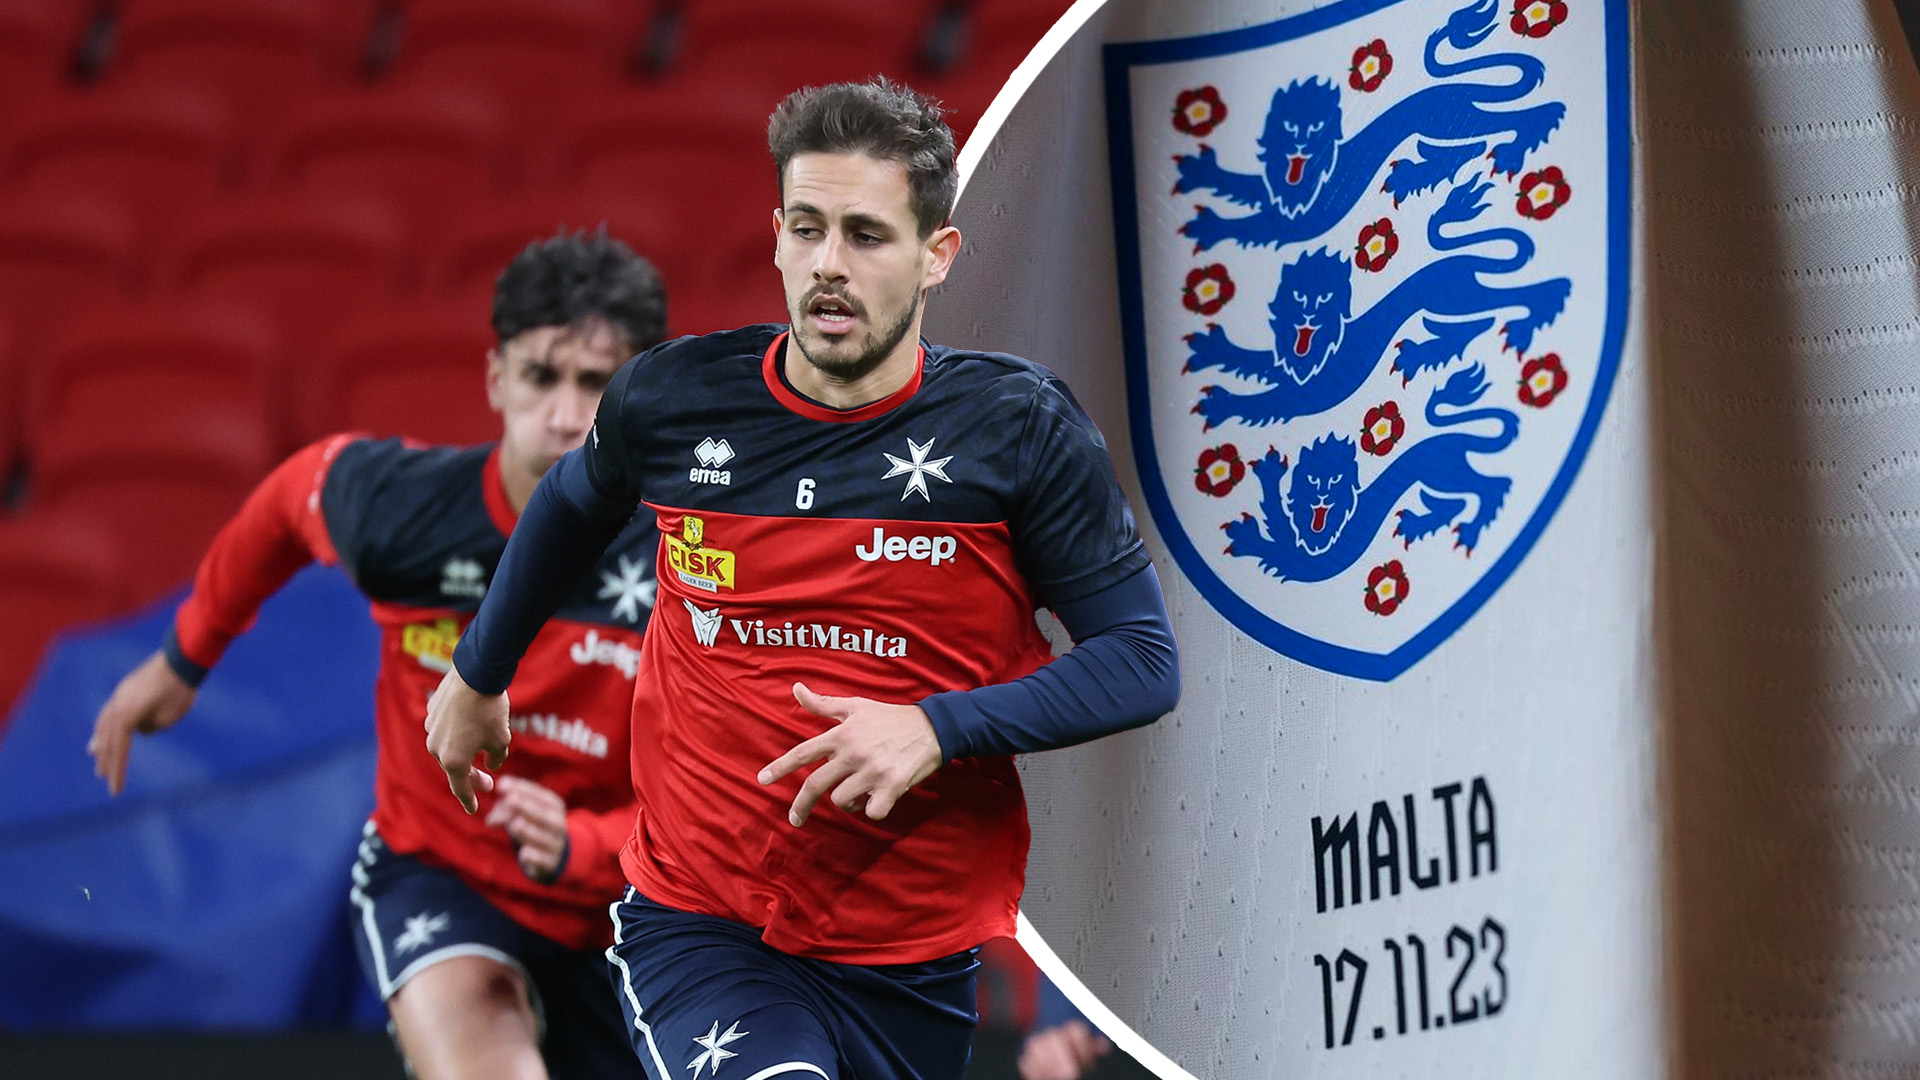 Hopeful Malta Faces England in Final Euro 2024 Qualifier After 7 Straight Losses